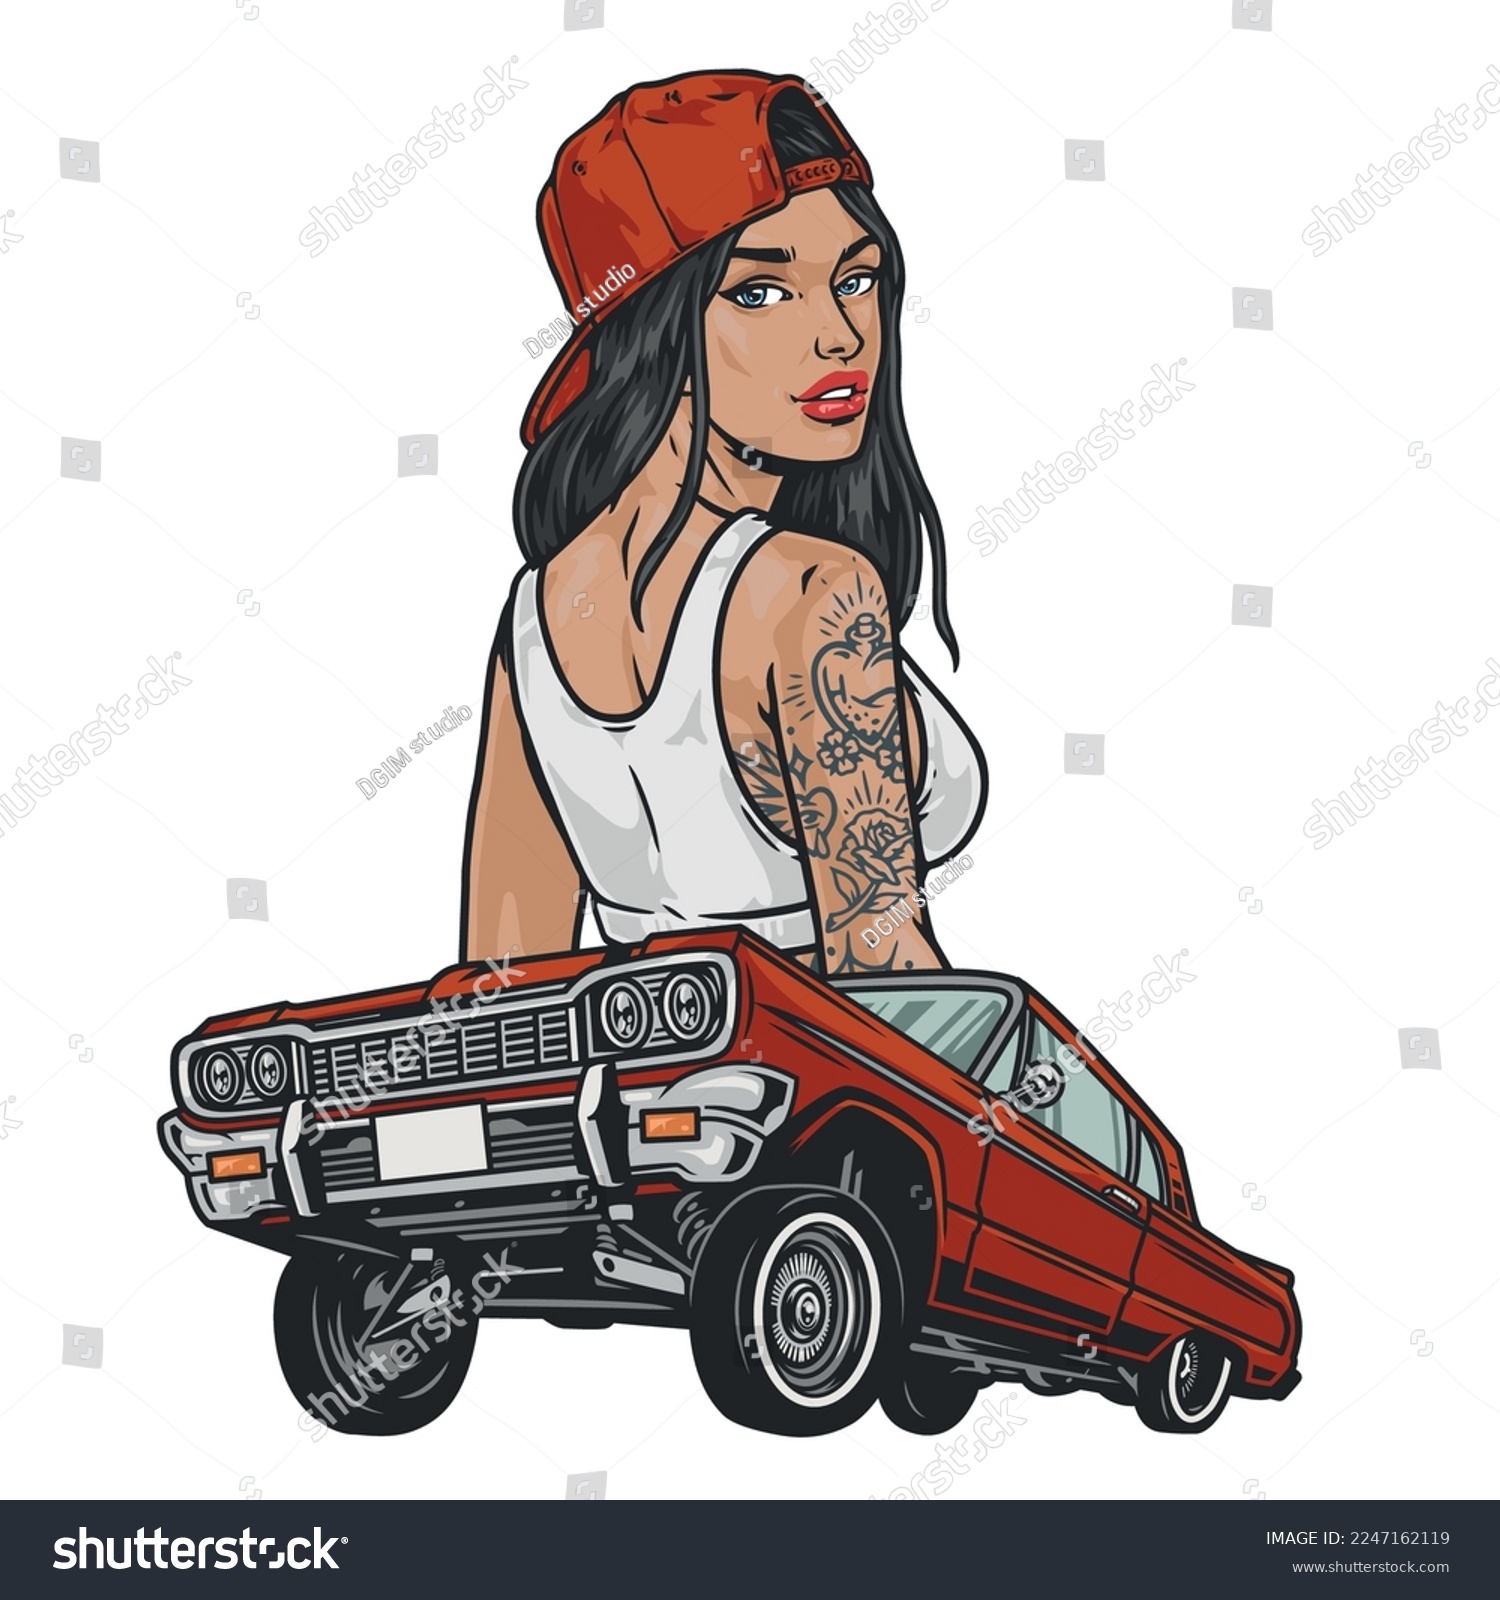 SVG of Cool girl lowrider colorful emblem beauty and jumping retro car to participate in competitions or youth street parties vector illustration svg